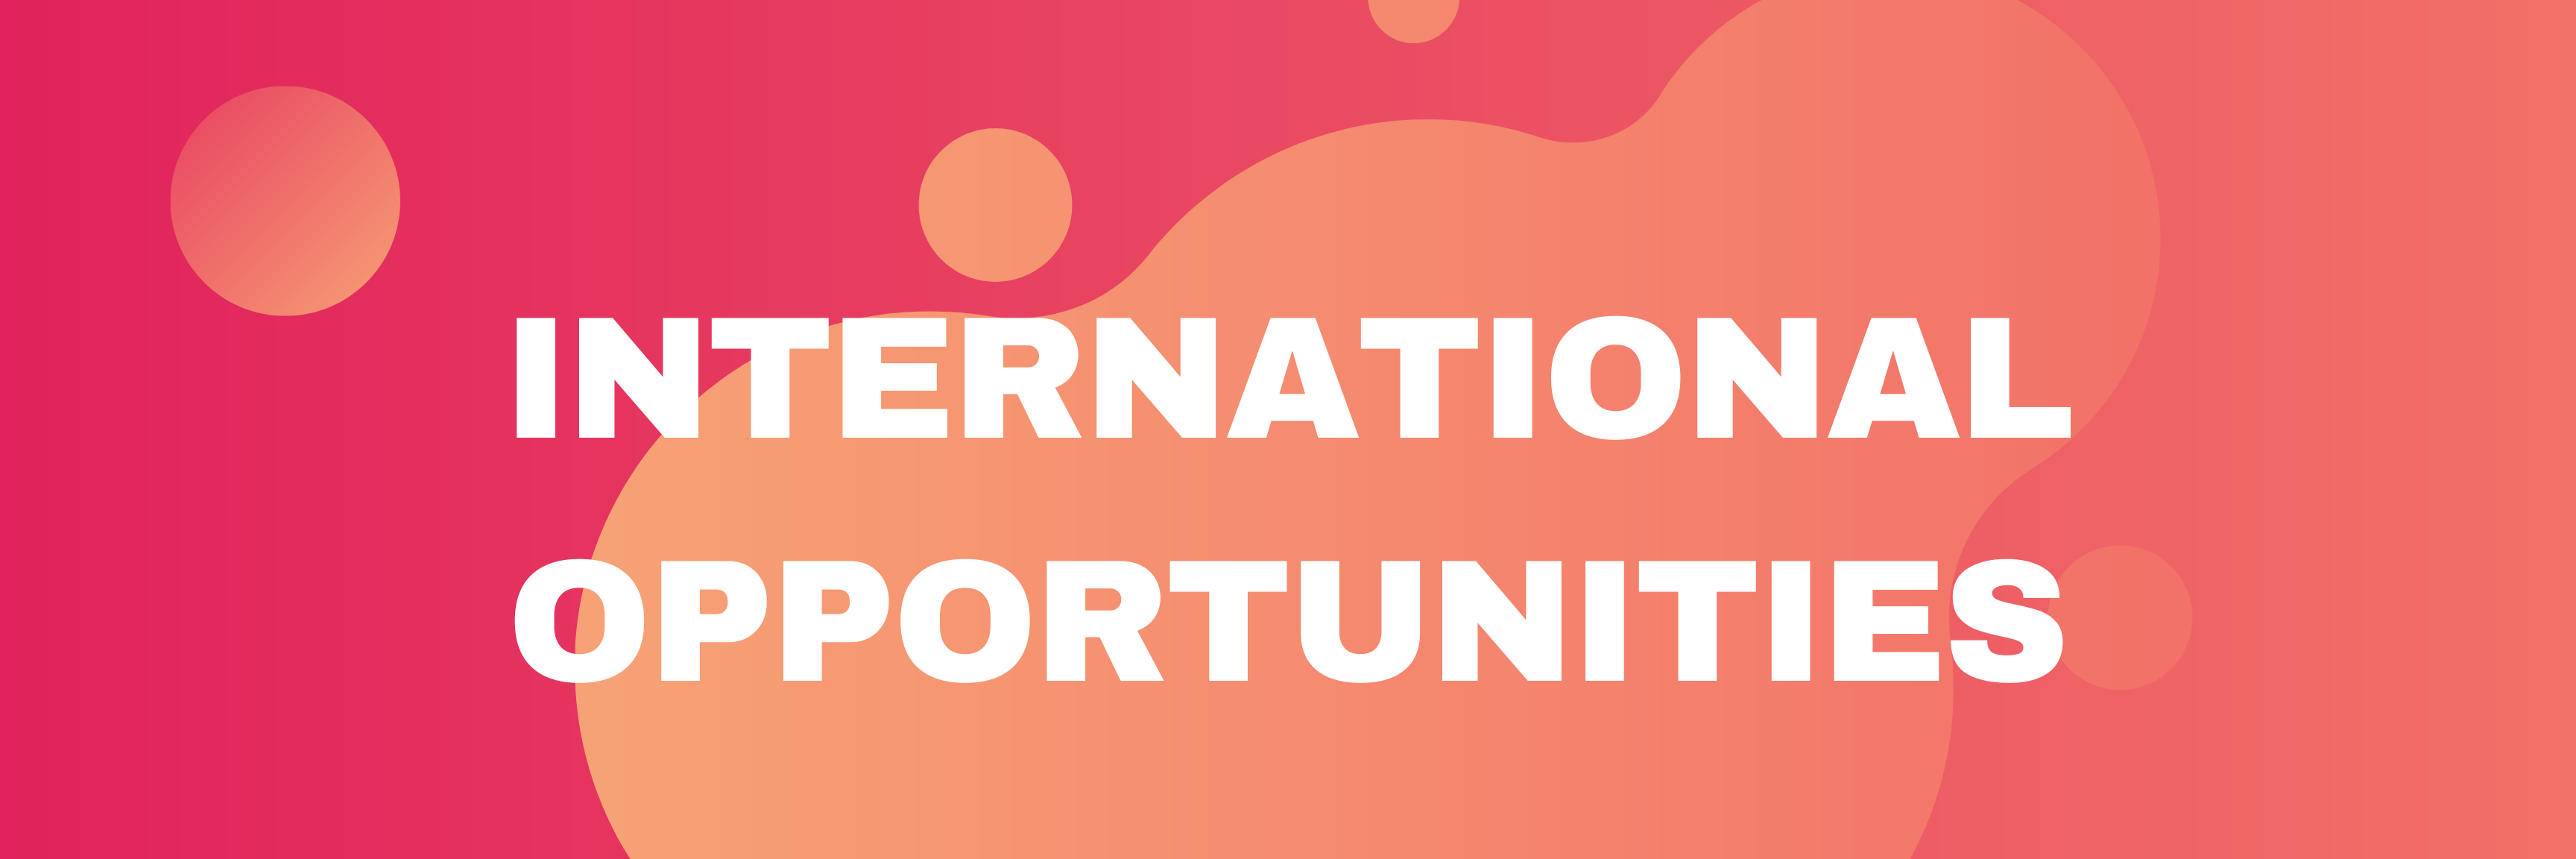 International Opportunities page banner